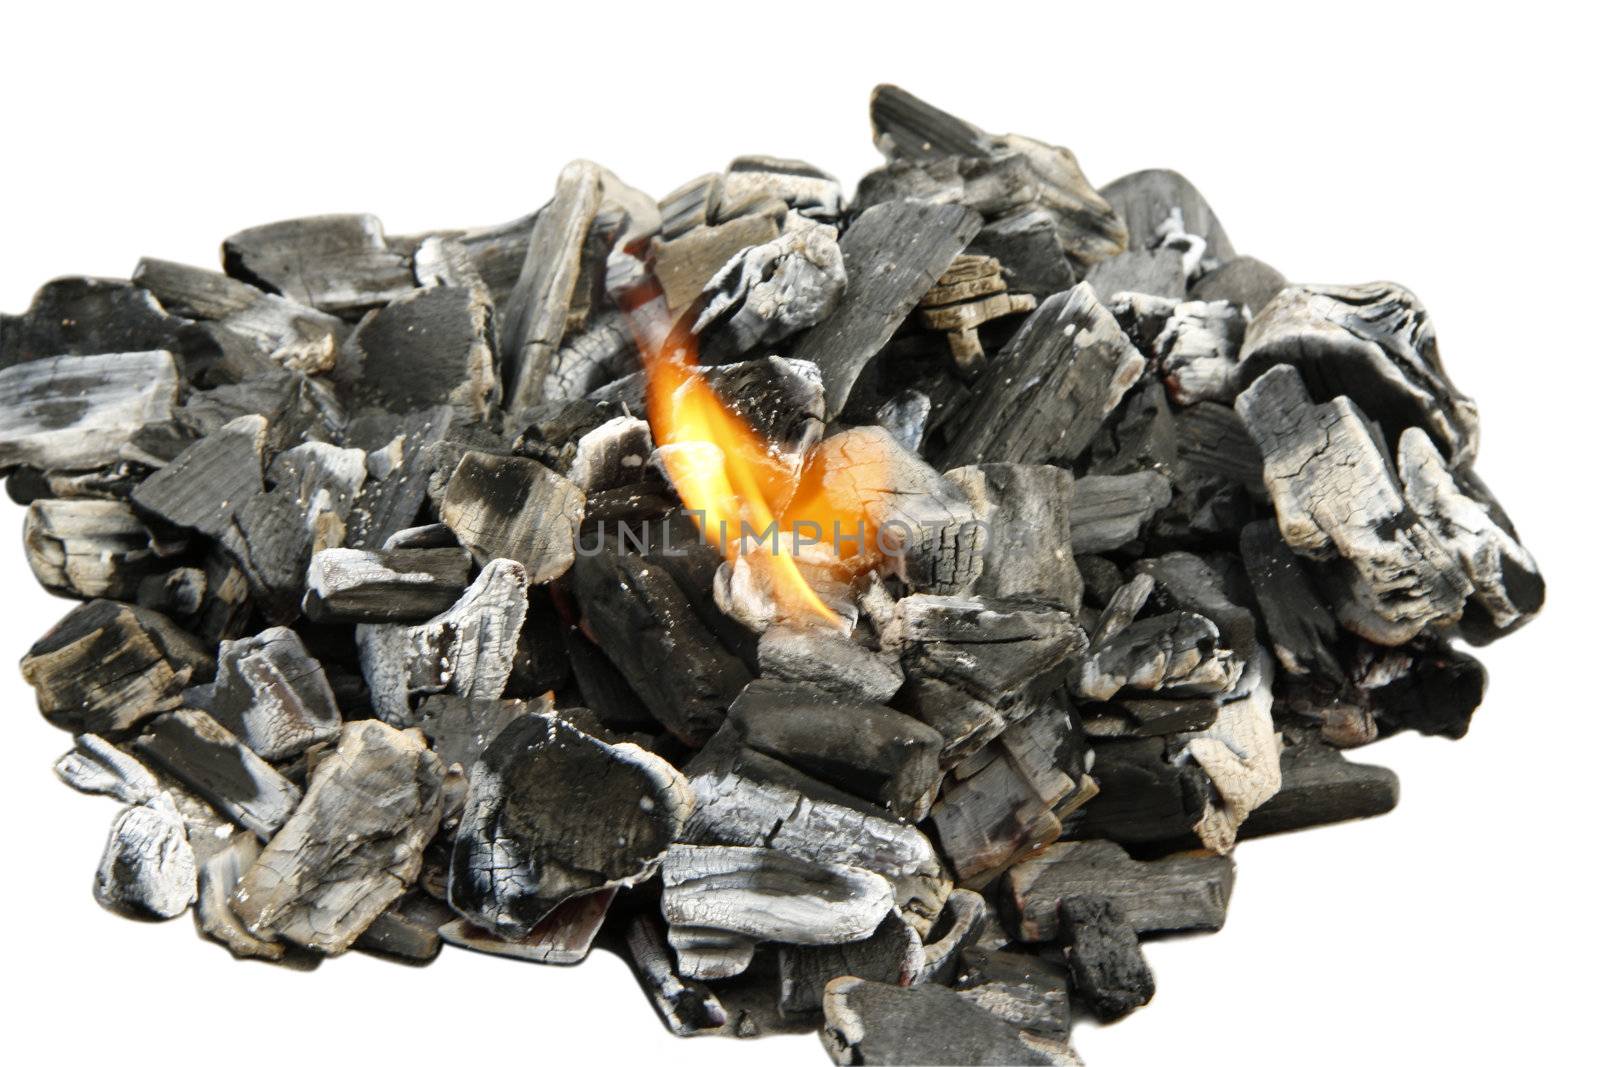 Glowing charcoal - isolated on white background